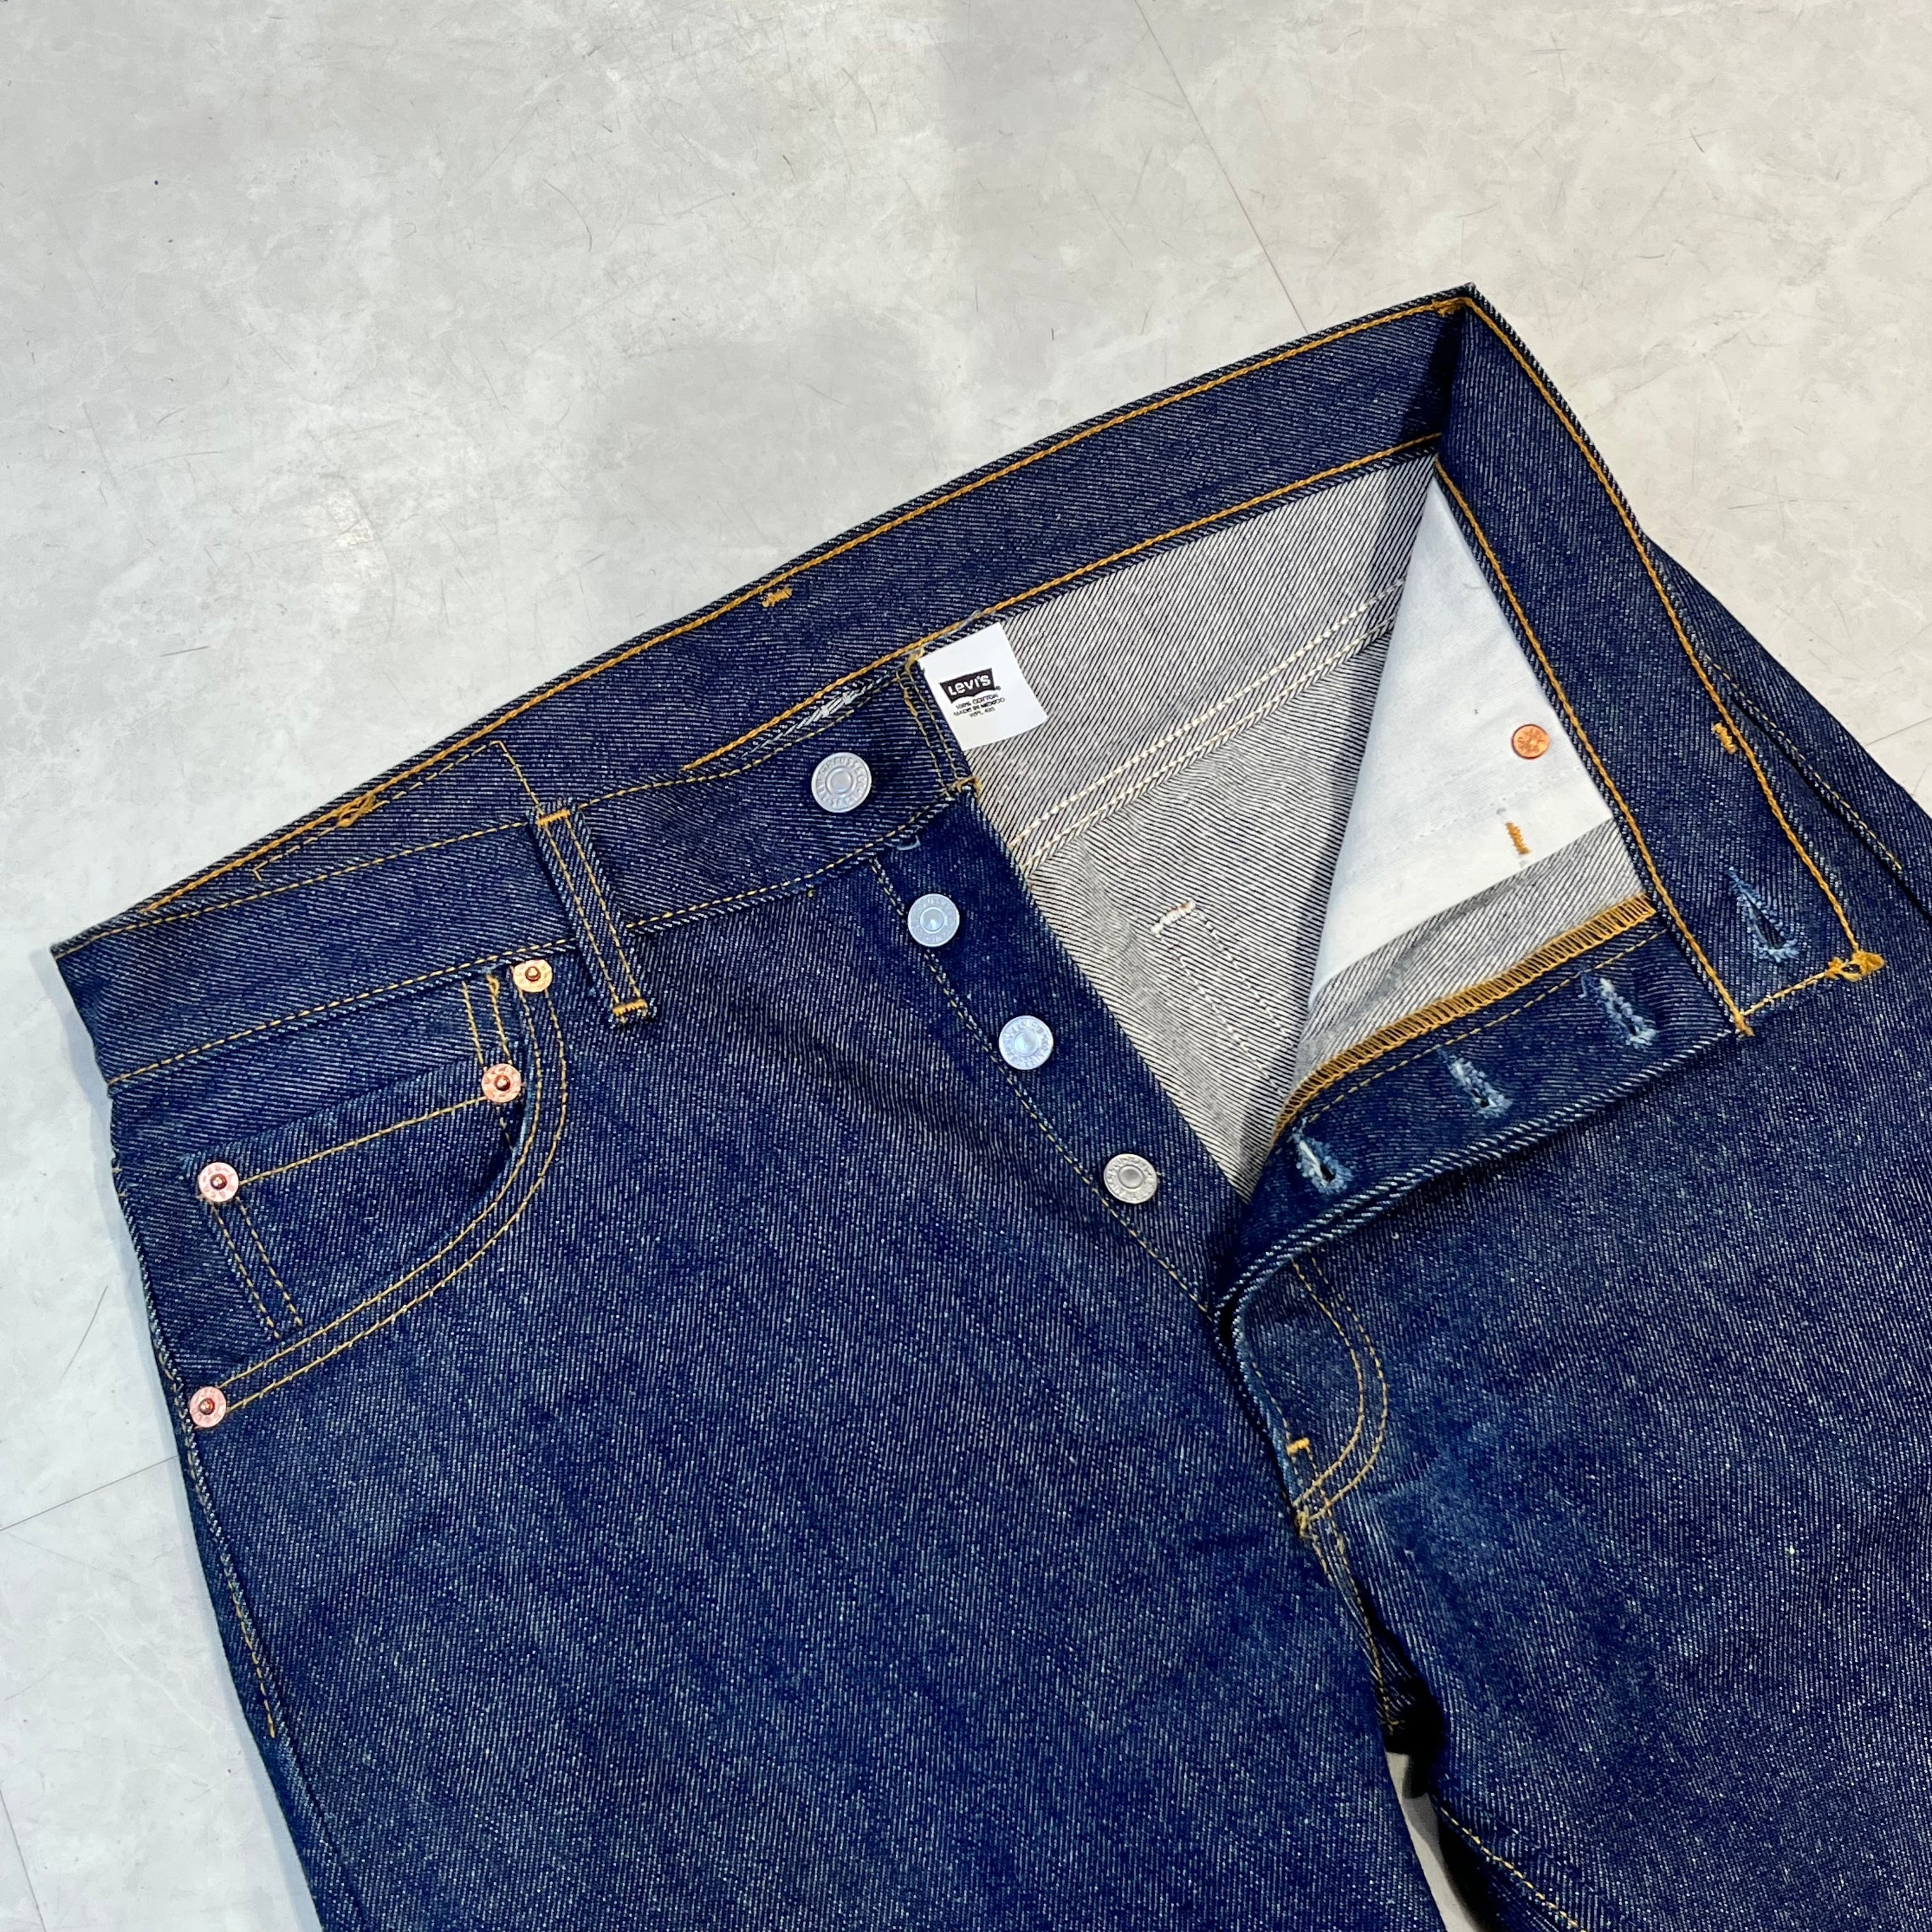 90s Levi's 501 Denim Pants made in Mexico 90年代 リーバイス 501 ...